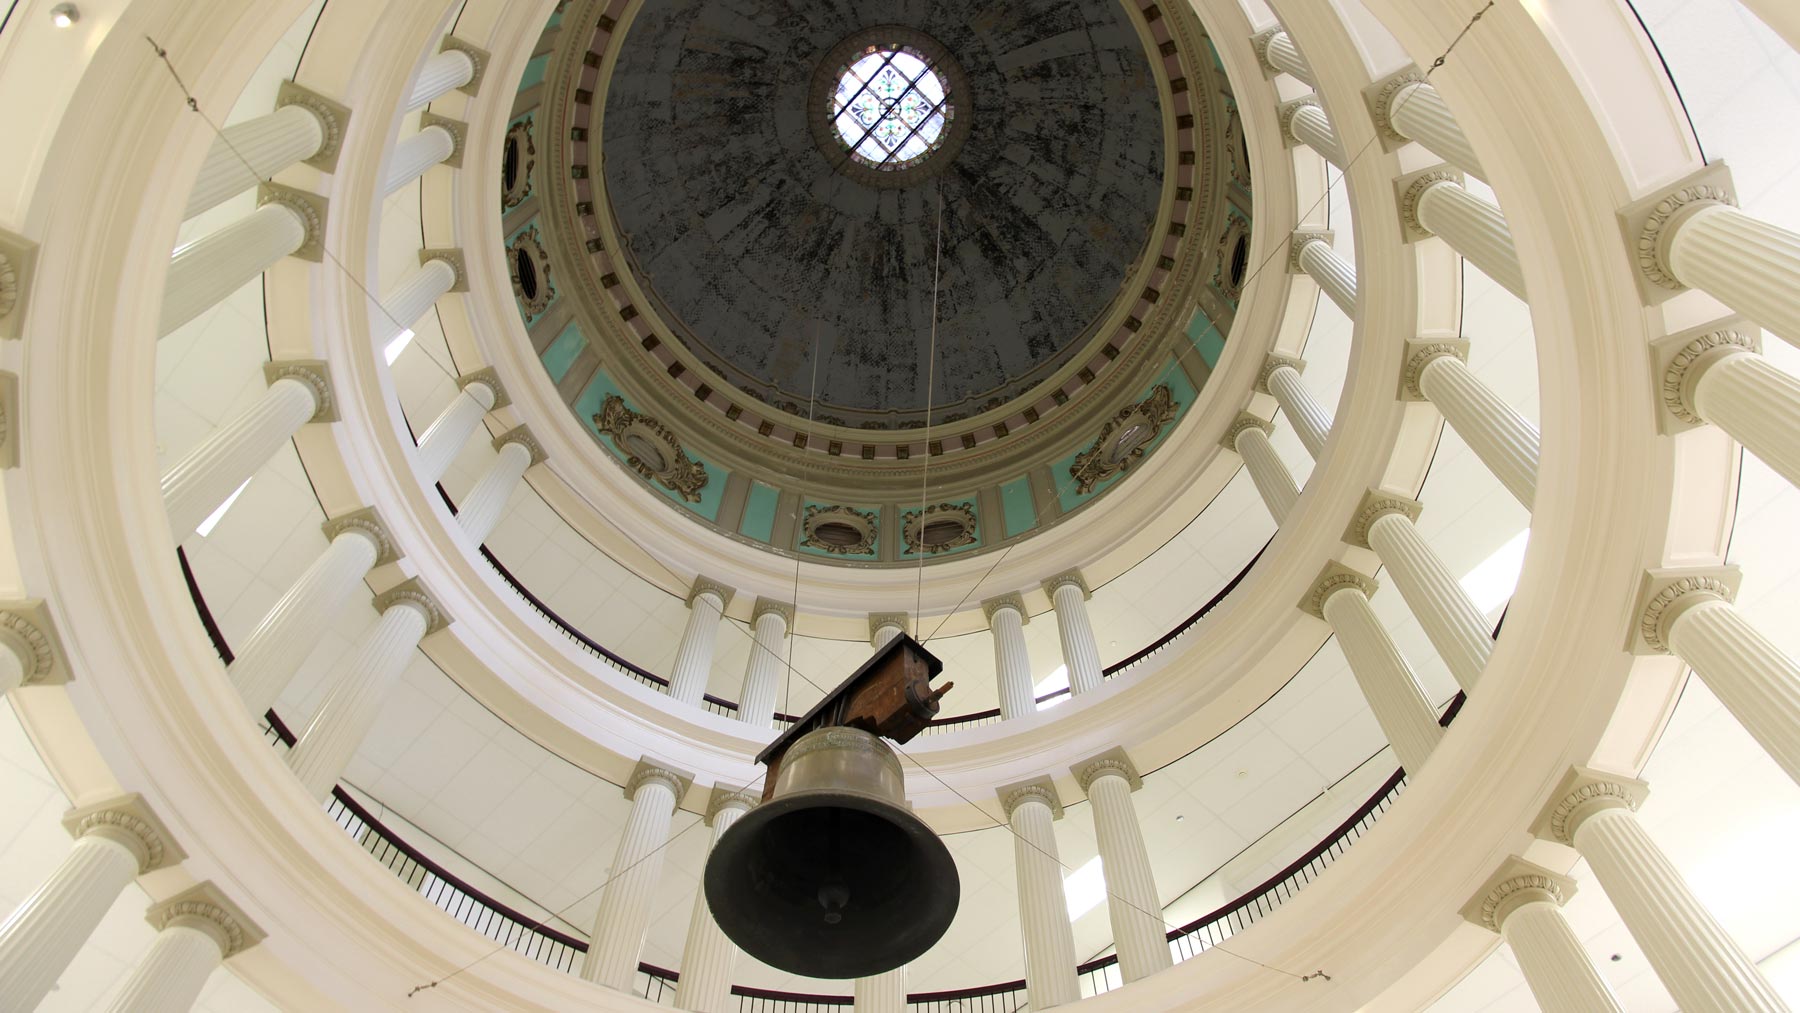 The liberty bell hanging inside the Academic Building